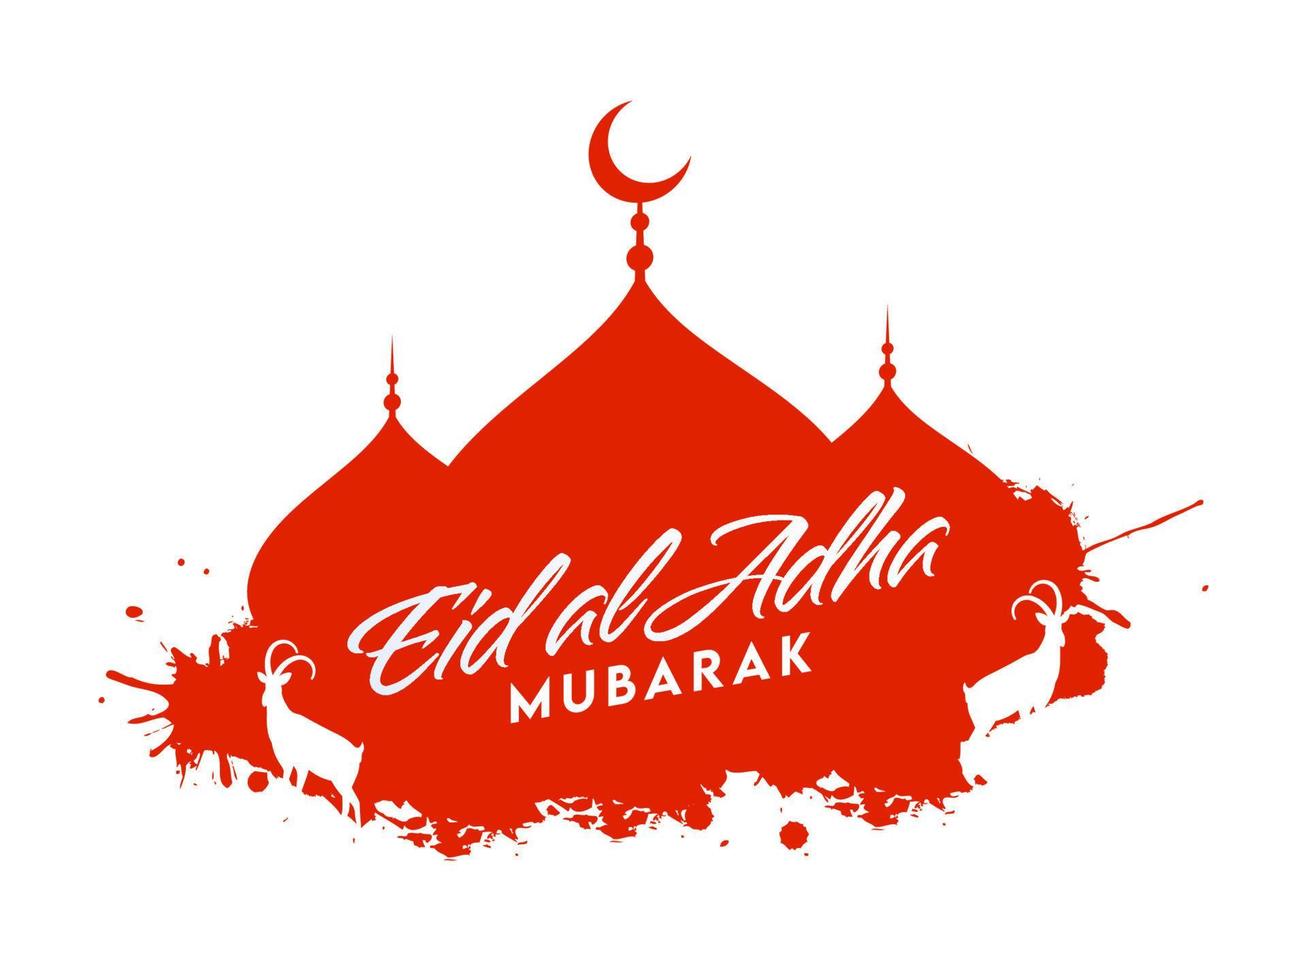 Eid-Al-Adha Mubarak Font with Silhouette Mosque, Goats and Red Splash Effect on White Background. vector